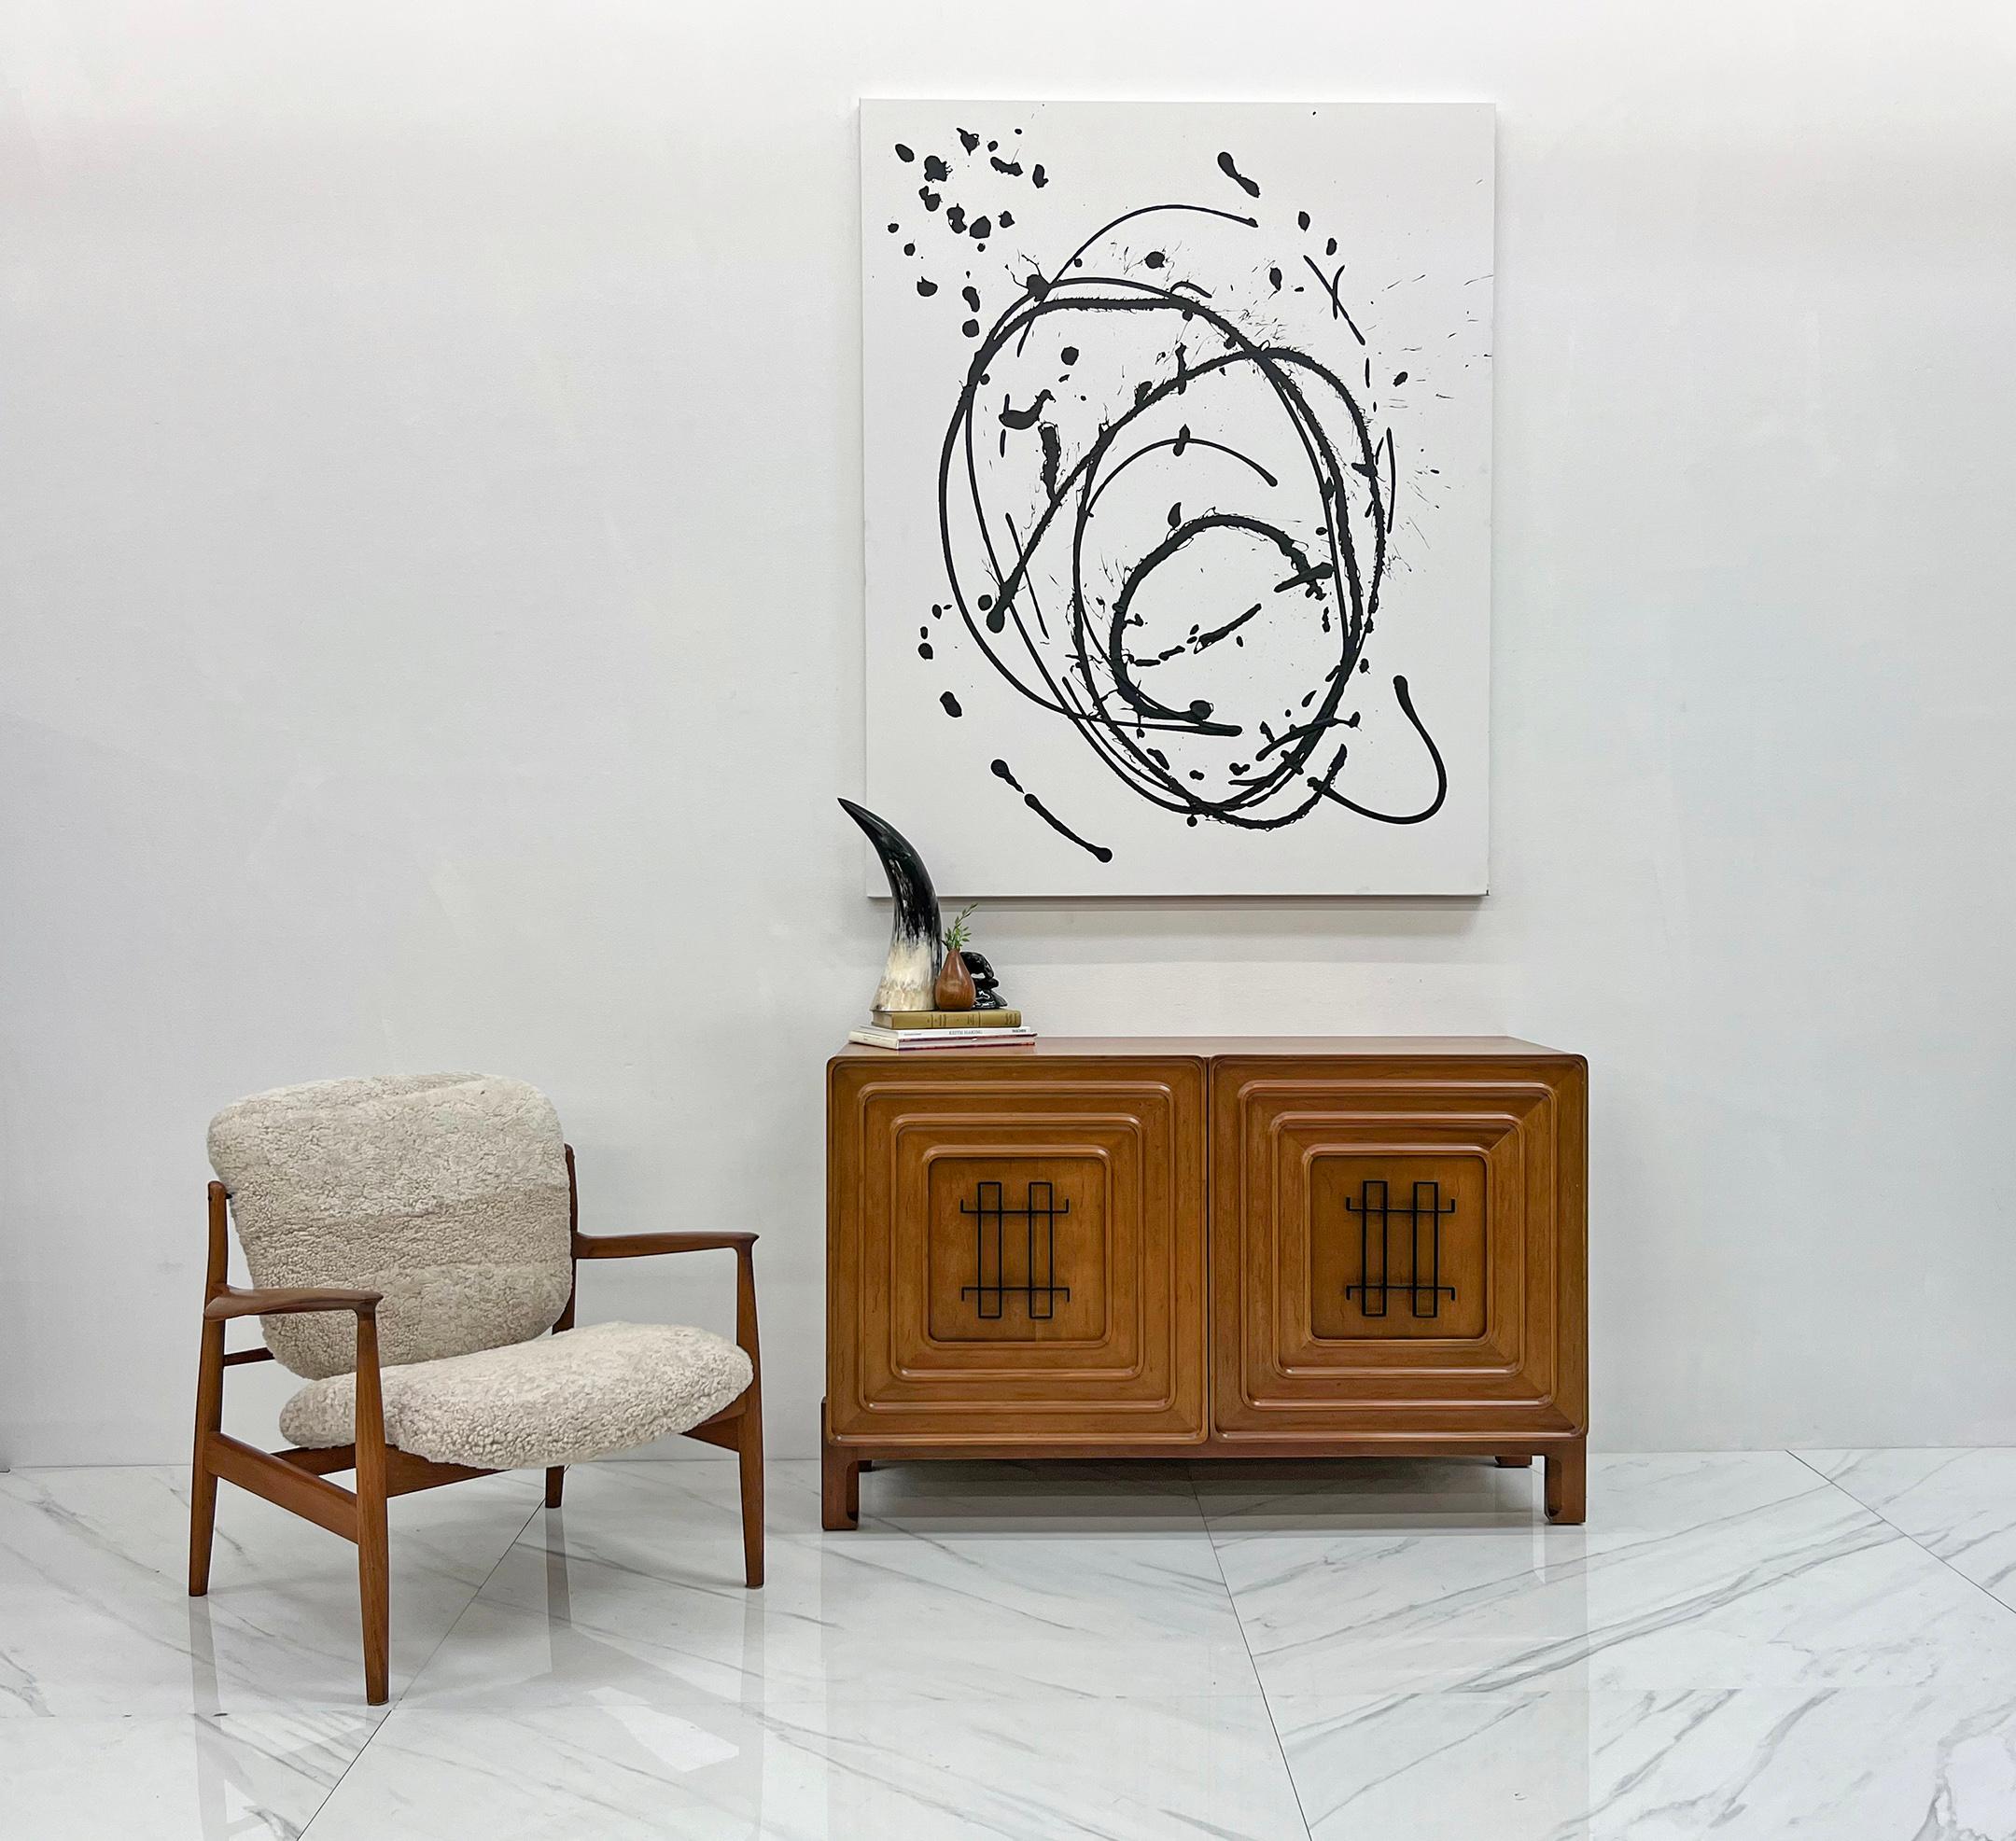 This is an extraordinary credenza/cabinet, masterfully designed by renowned Swedish designer Edmond Spence. This exquisite piece showcases Spence's exceptional talent and reflects his unique approach to furniture design.

Crafted for Industria